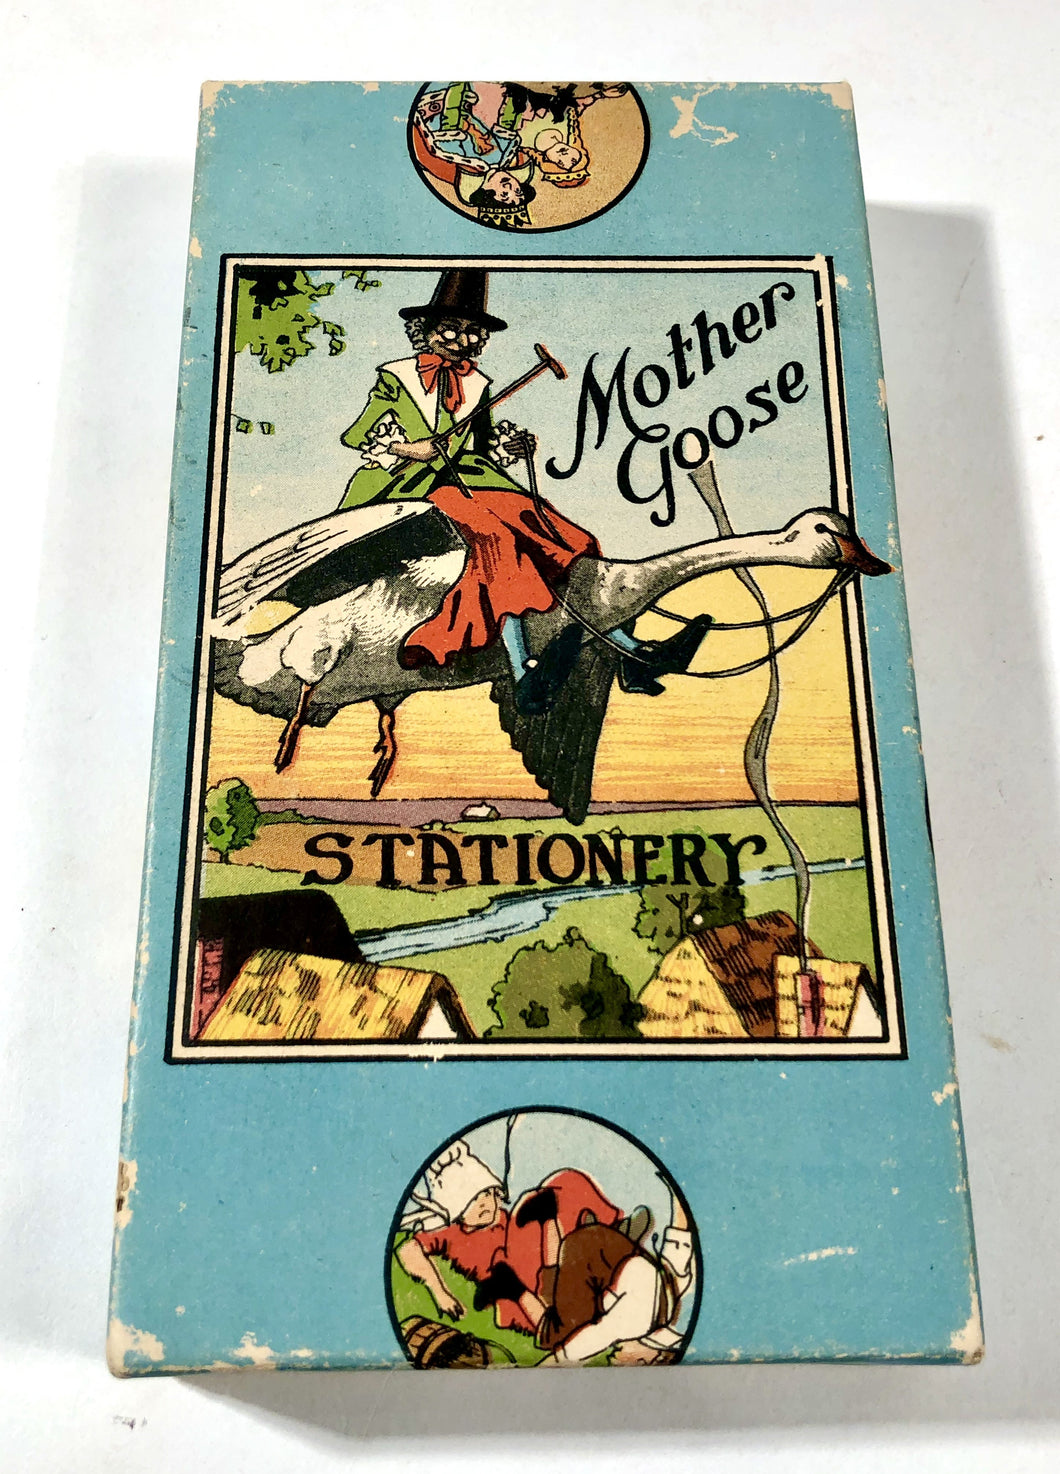 1920's MOTHER GOOSE STATIONARY Display Box || Nursery Rhyme Illustrations